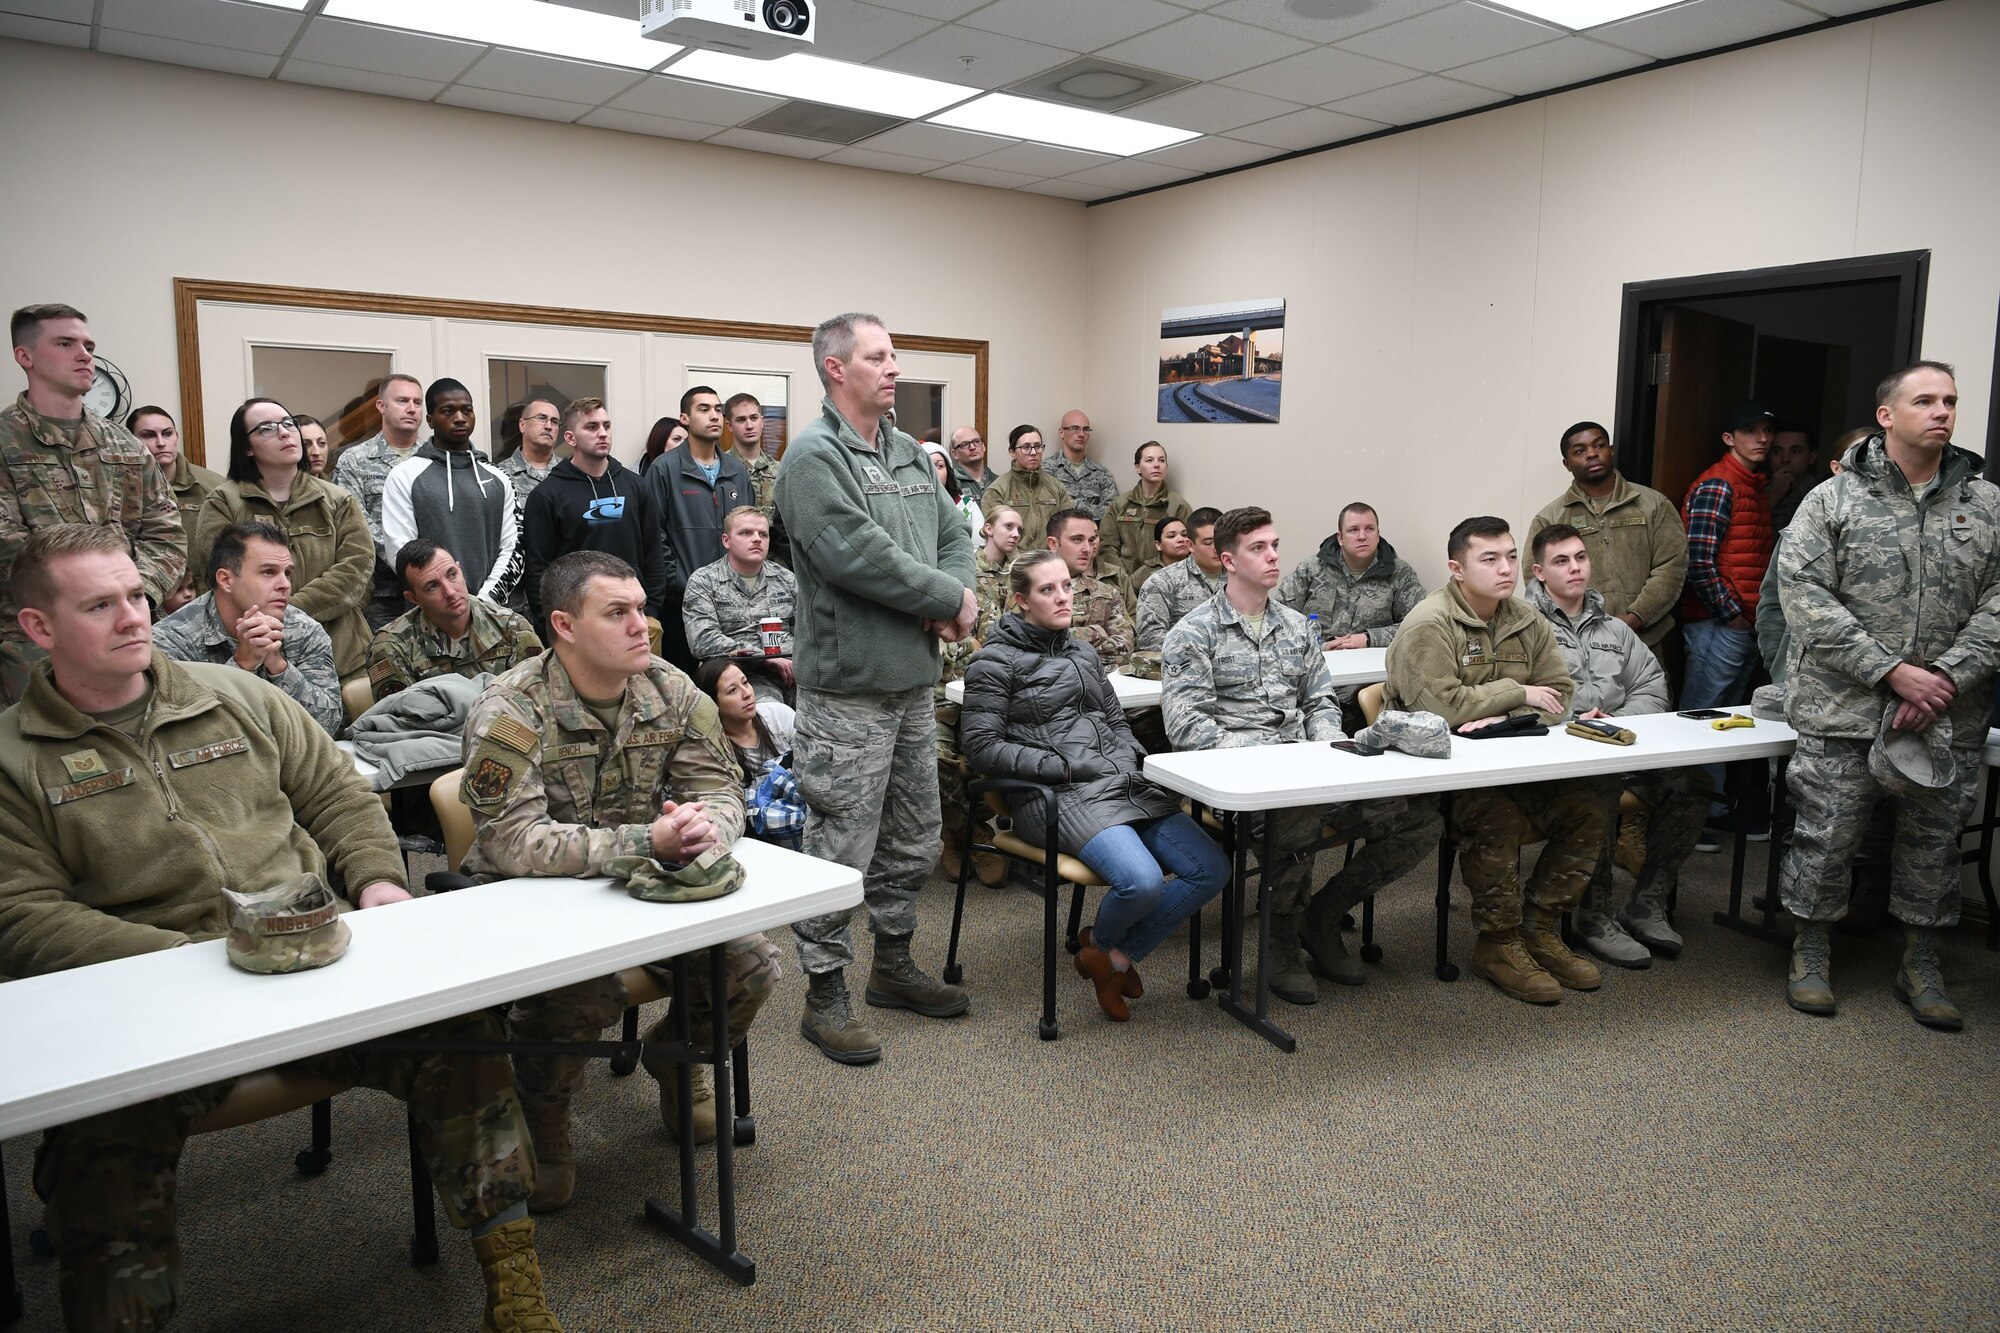 Airmen from Hill Air Force Base, Utah, listen to a brief at Utah Foster Care Foundation in Ogden before delivering gifts to foster children Dec. 18, 2019, as part of a volunteer effort called Santa Brigade.  Around 85 Airmen from various commands played Santa for the day delivering 537 gifts to over 140 foster care families around Northern Utah. (U.S. Air Force photo by Cynthia Griggs)